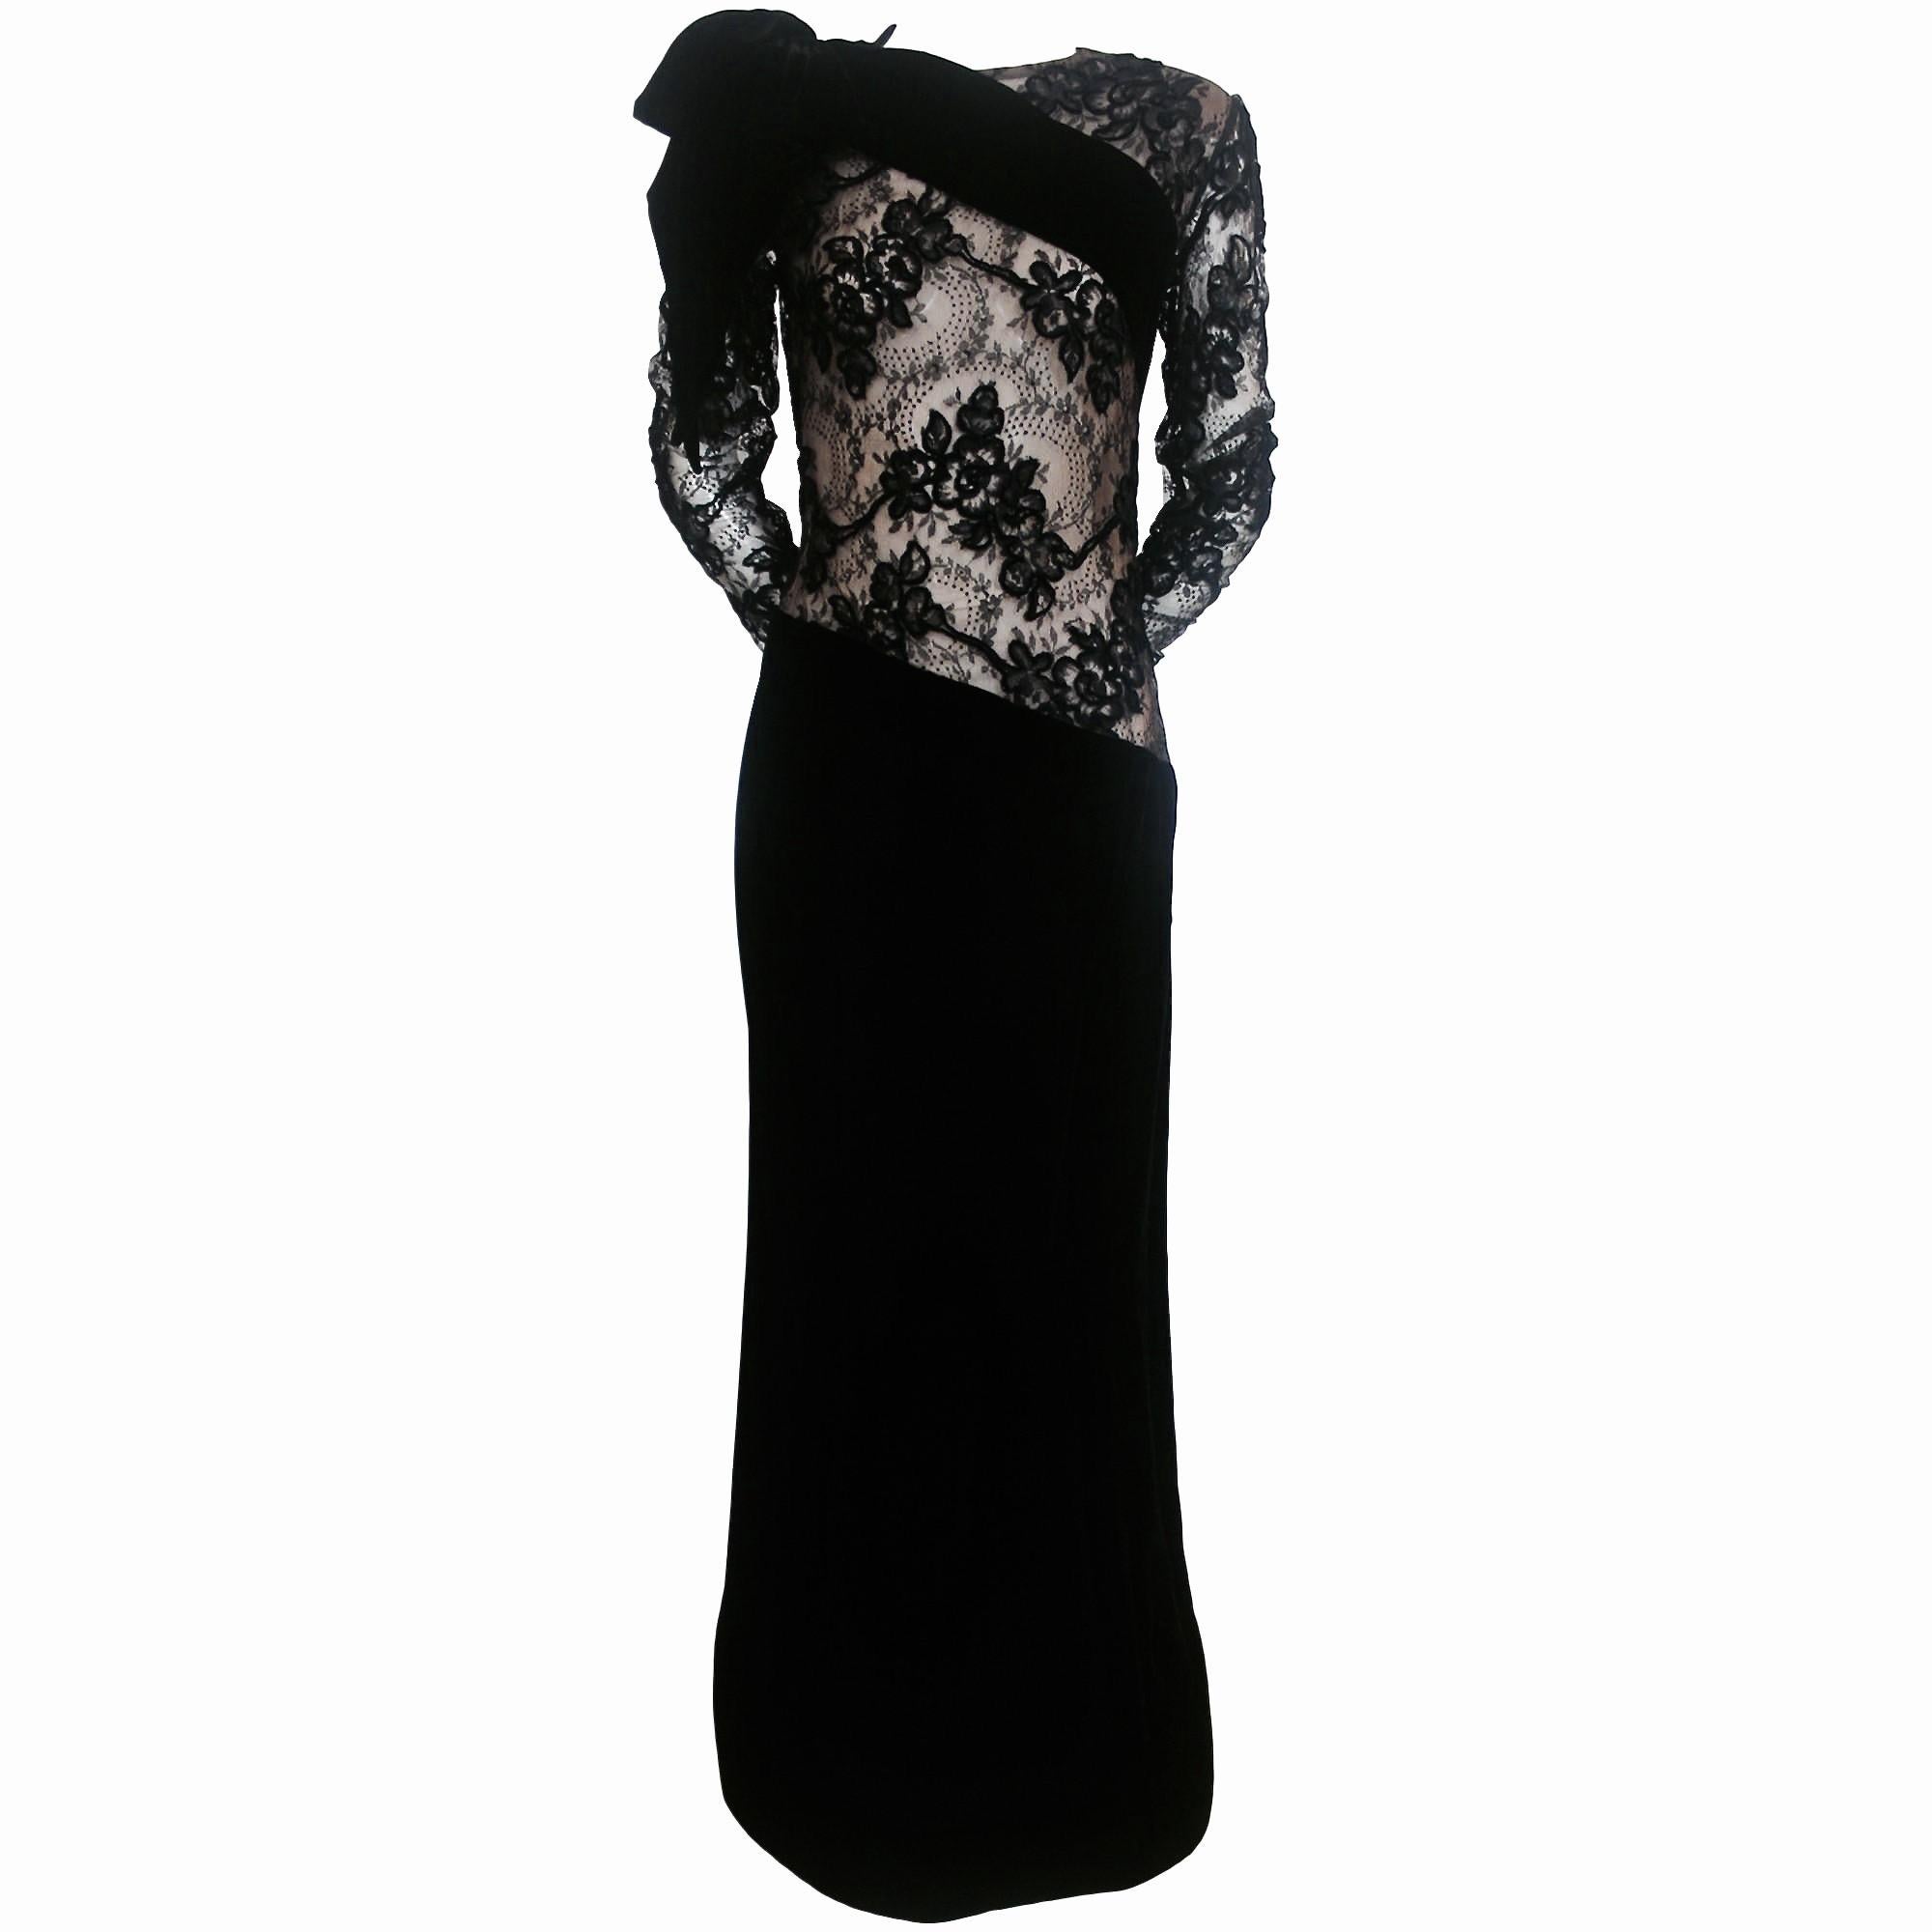 Jacqueline de Ribes Velvet and Lace Evening dress with Large Bows For Sale 6